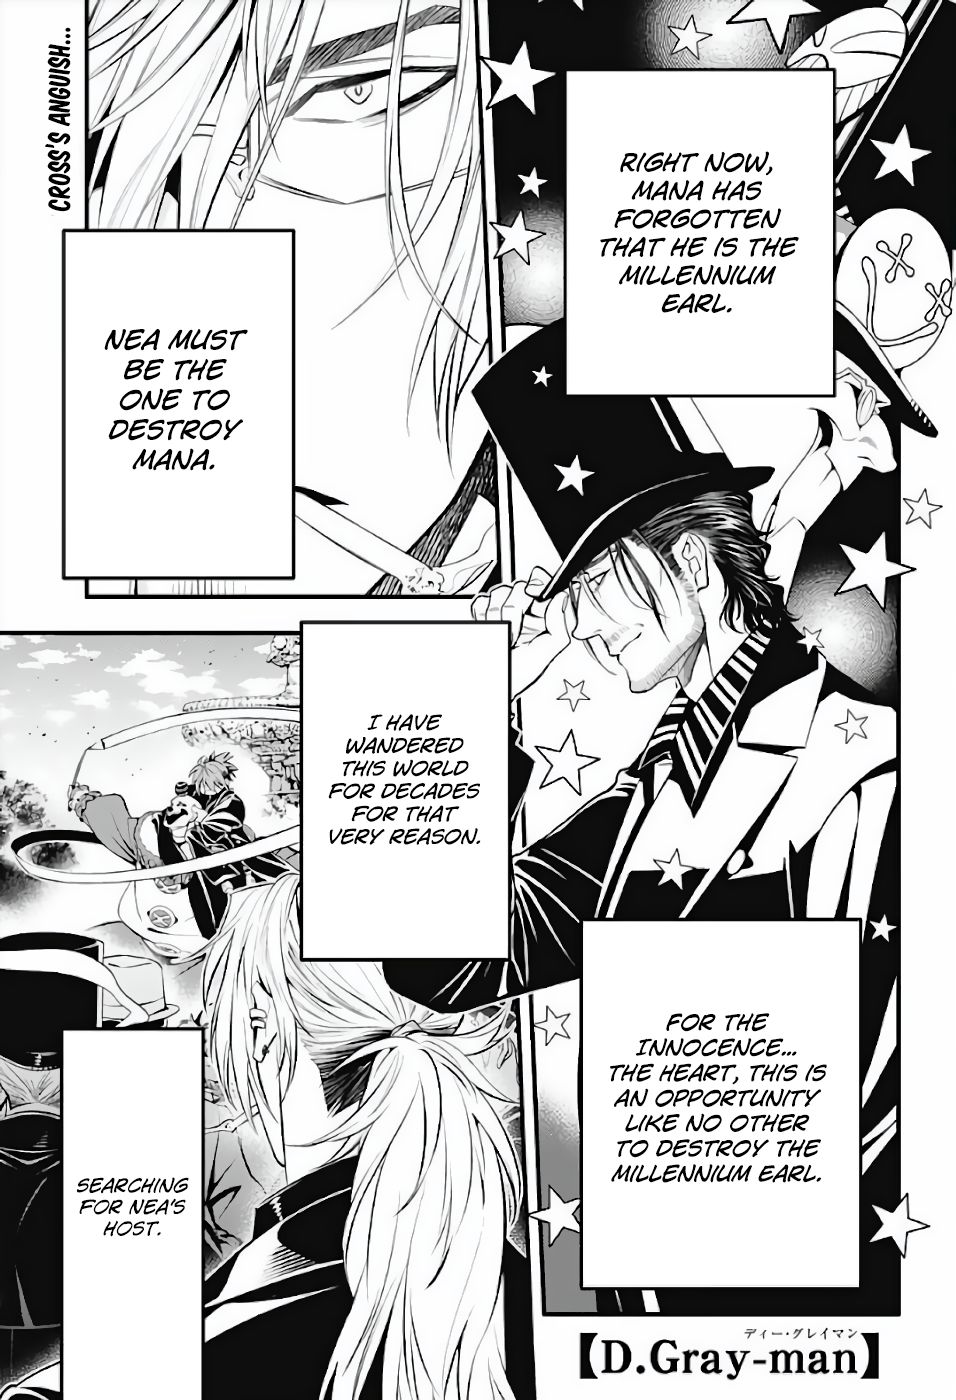 D.Gray-man chapter 237 page 3